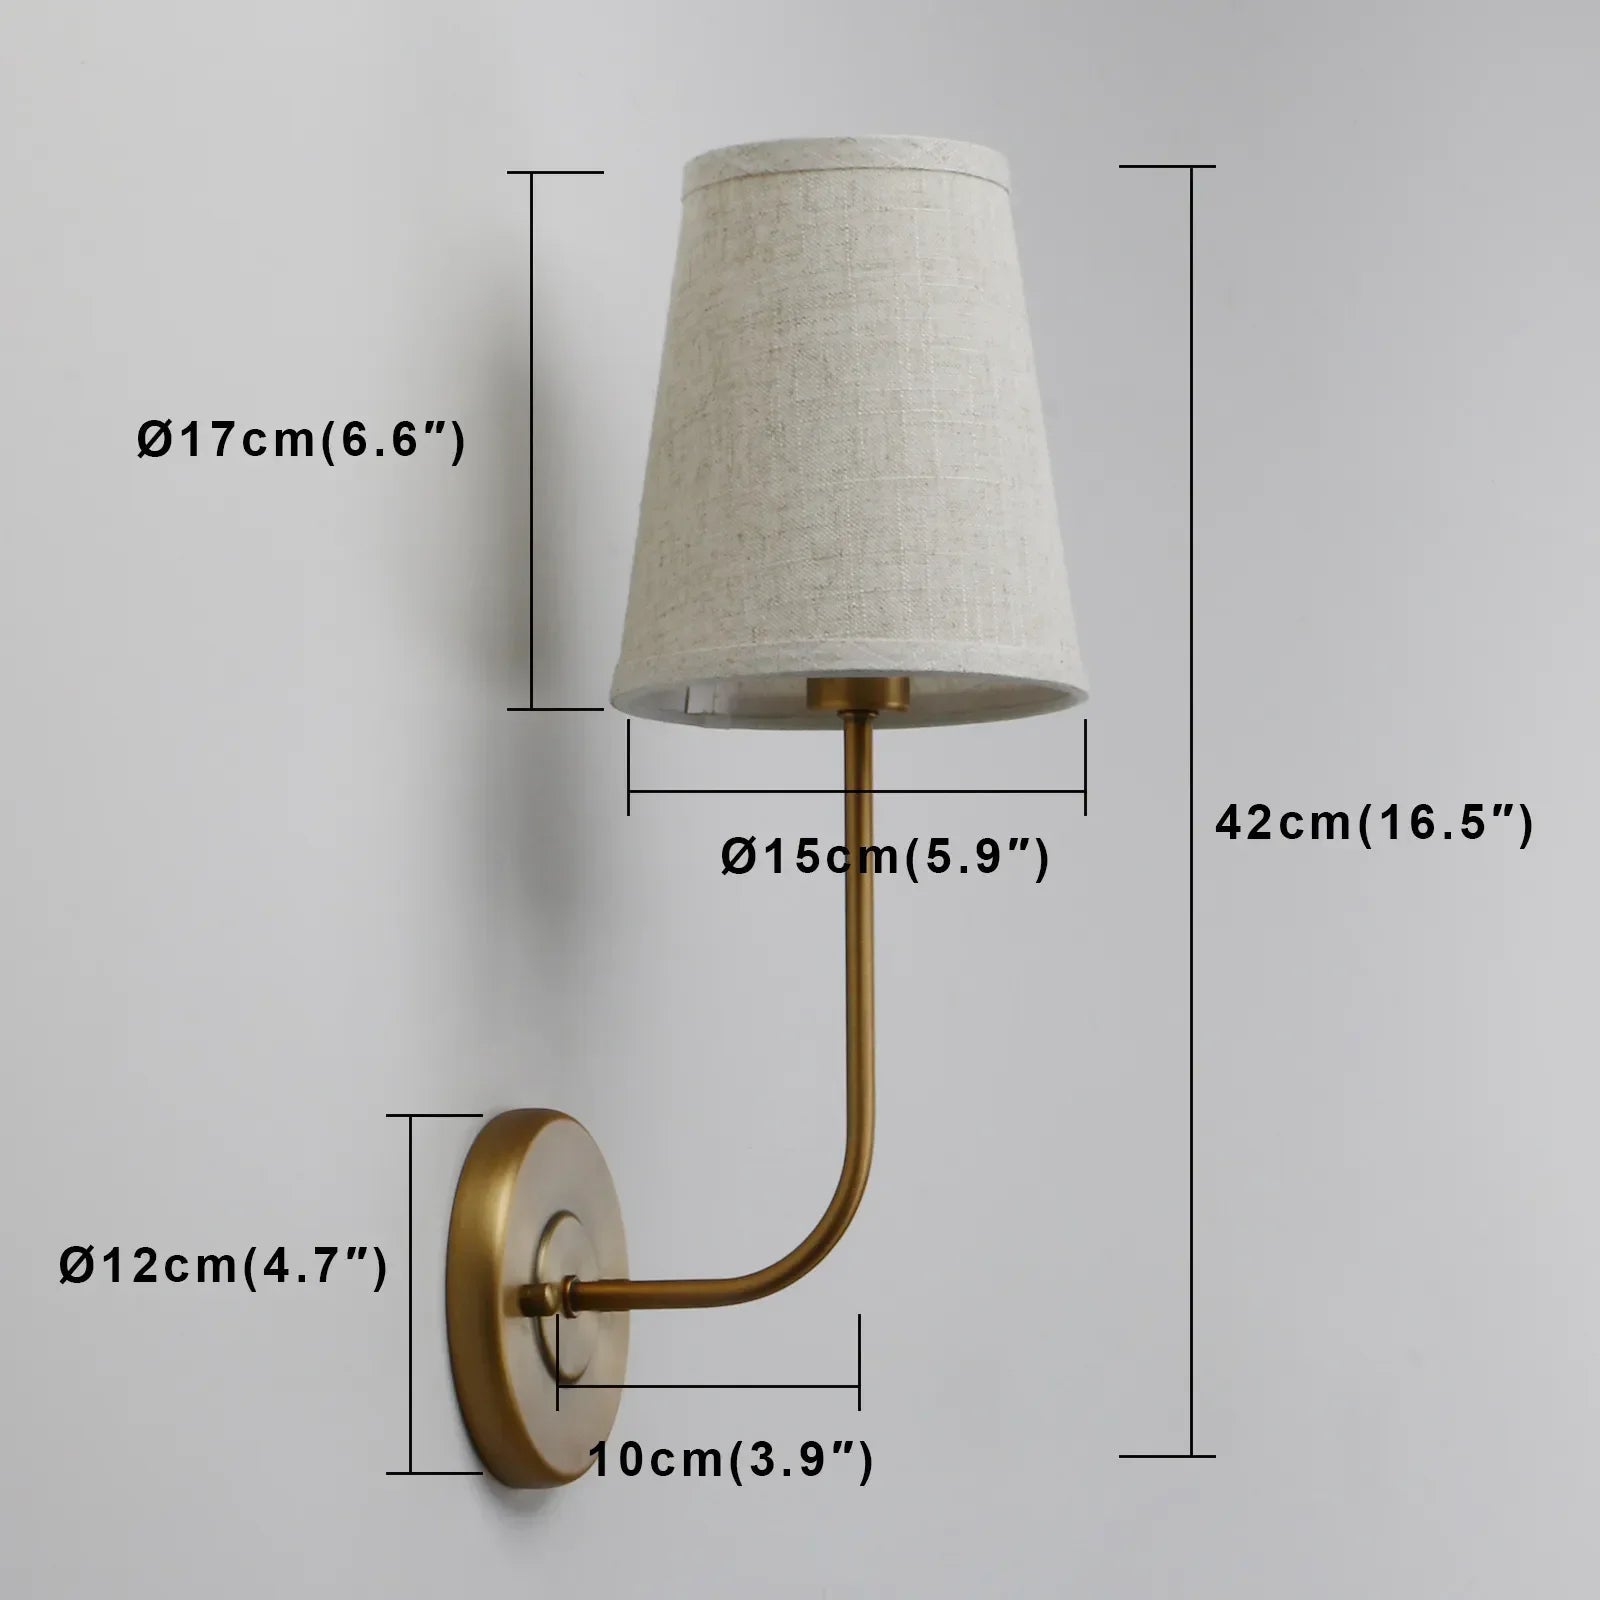 Classical Iron Wall Lamp With Fabric Shade - Elegant Dual-light Mounted Fixture For Bedroom, - Minimalist Lamps